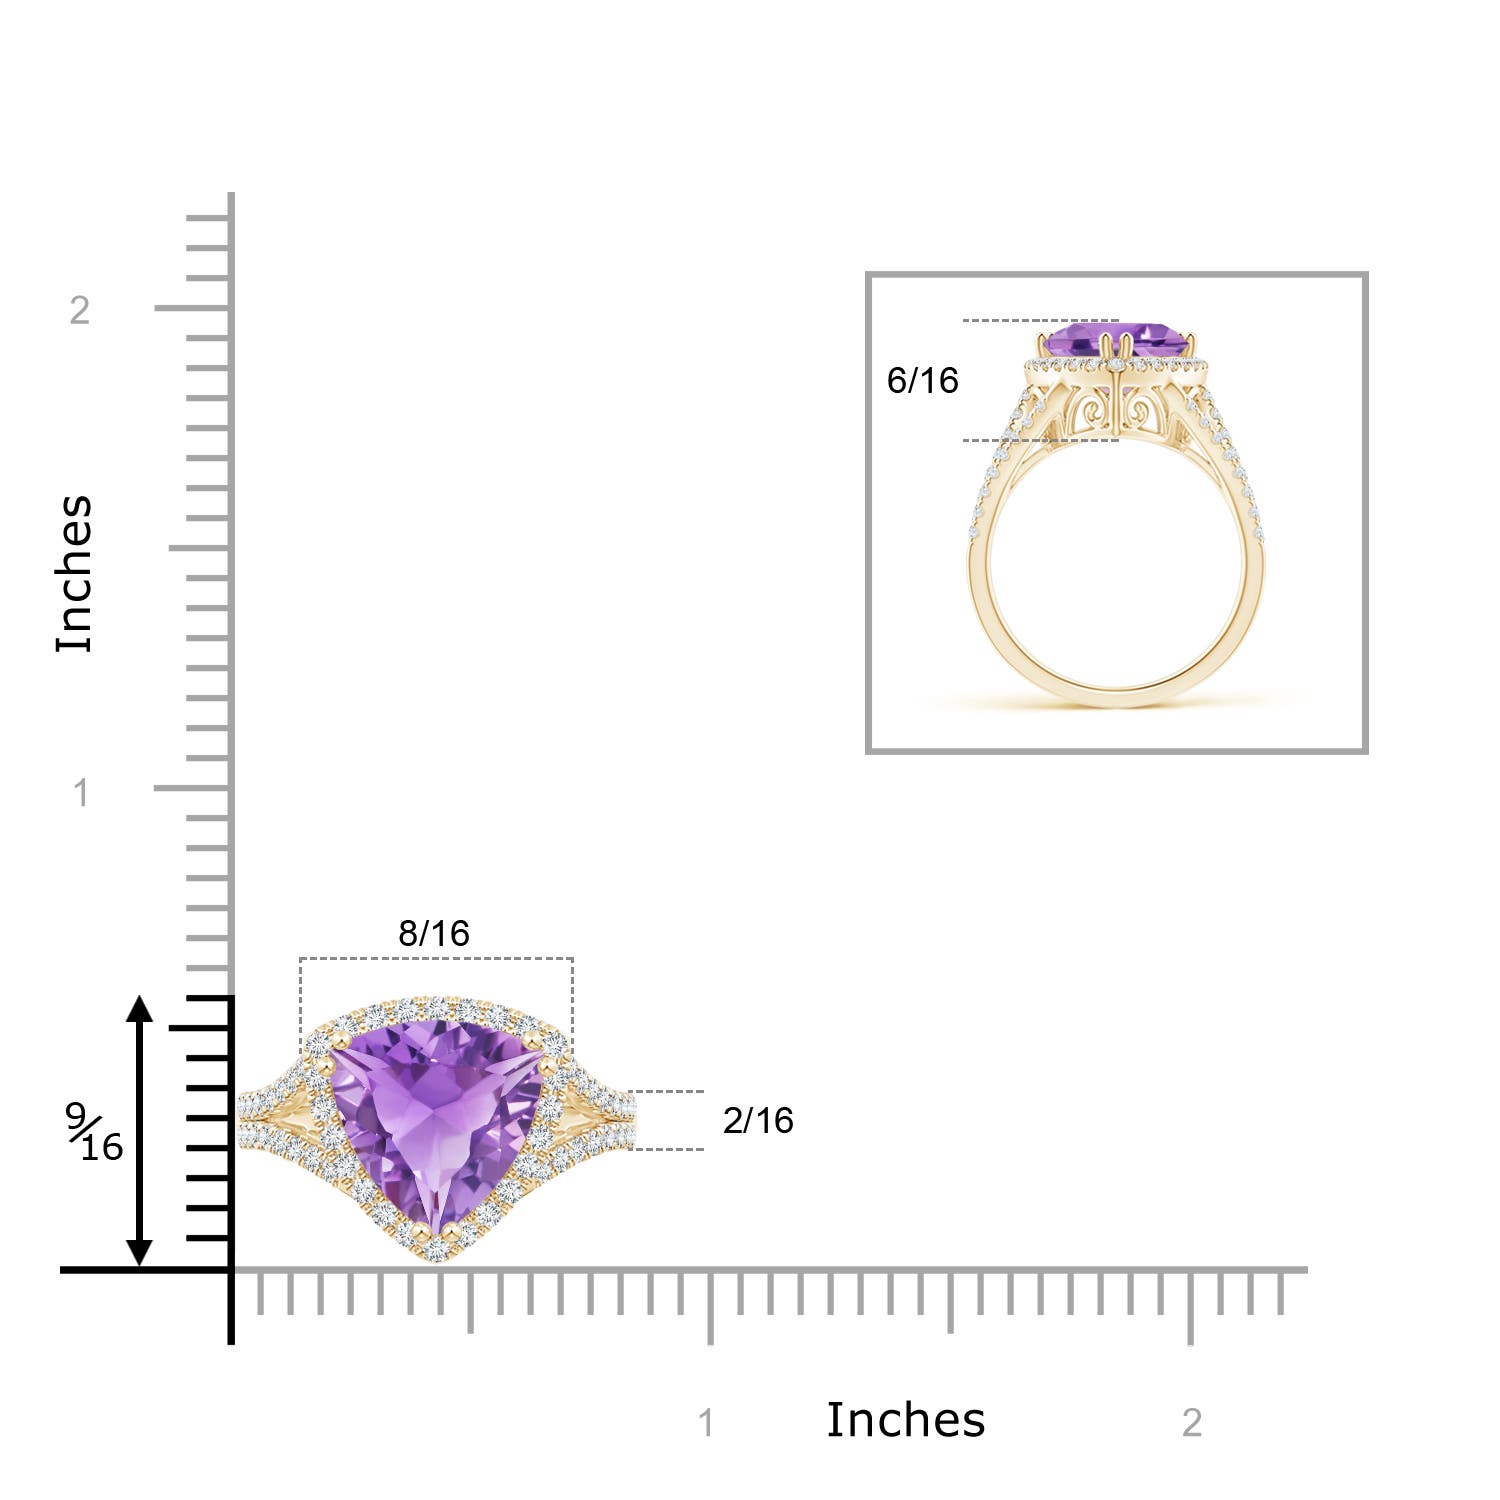 A - Amethyst / 3.16 CT / 14 KT Yellow Gold